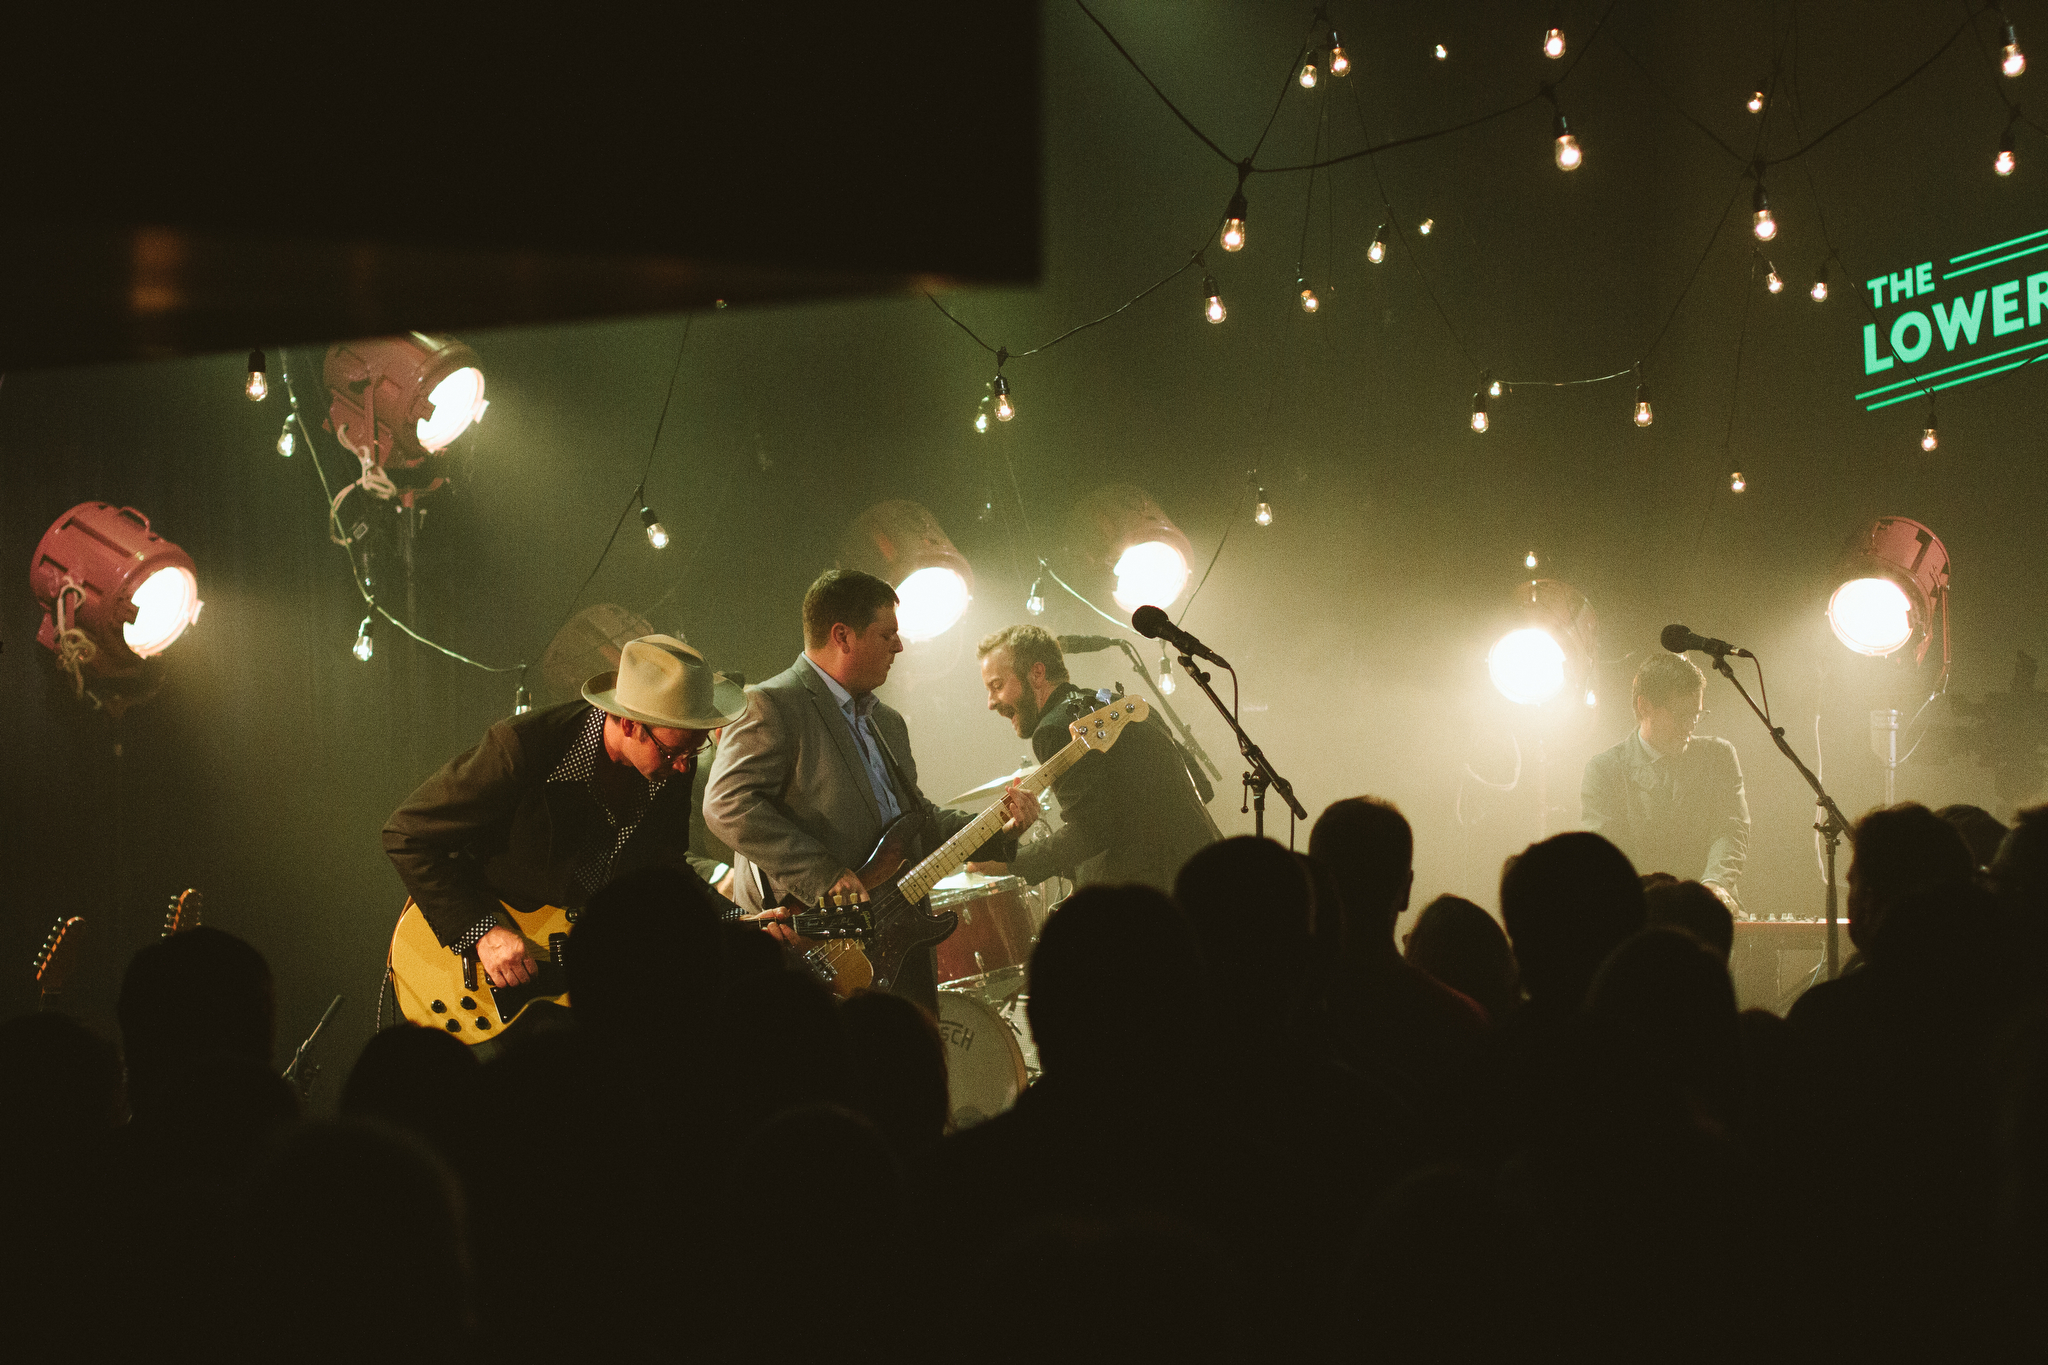 Dead Man Winter with Trampled by Turtles front man Dave Simonett, Erik Koskinen and JT Bates